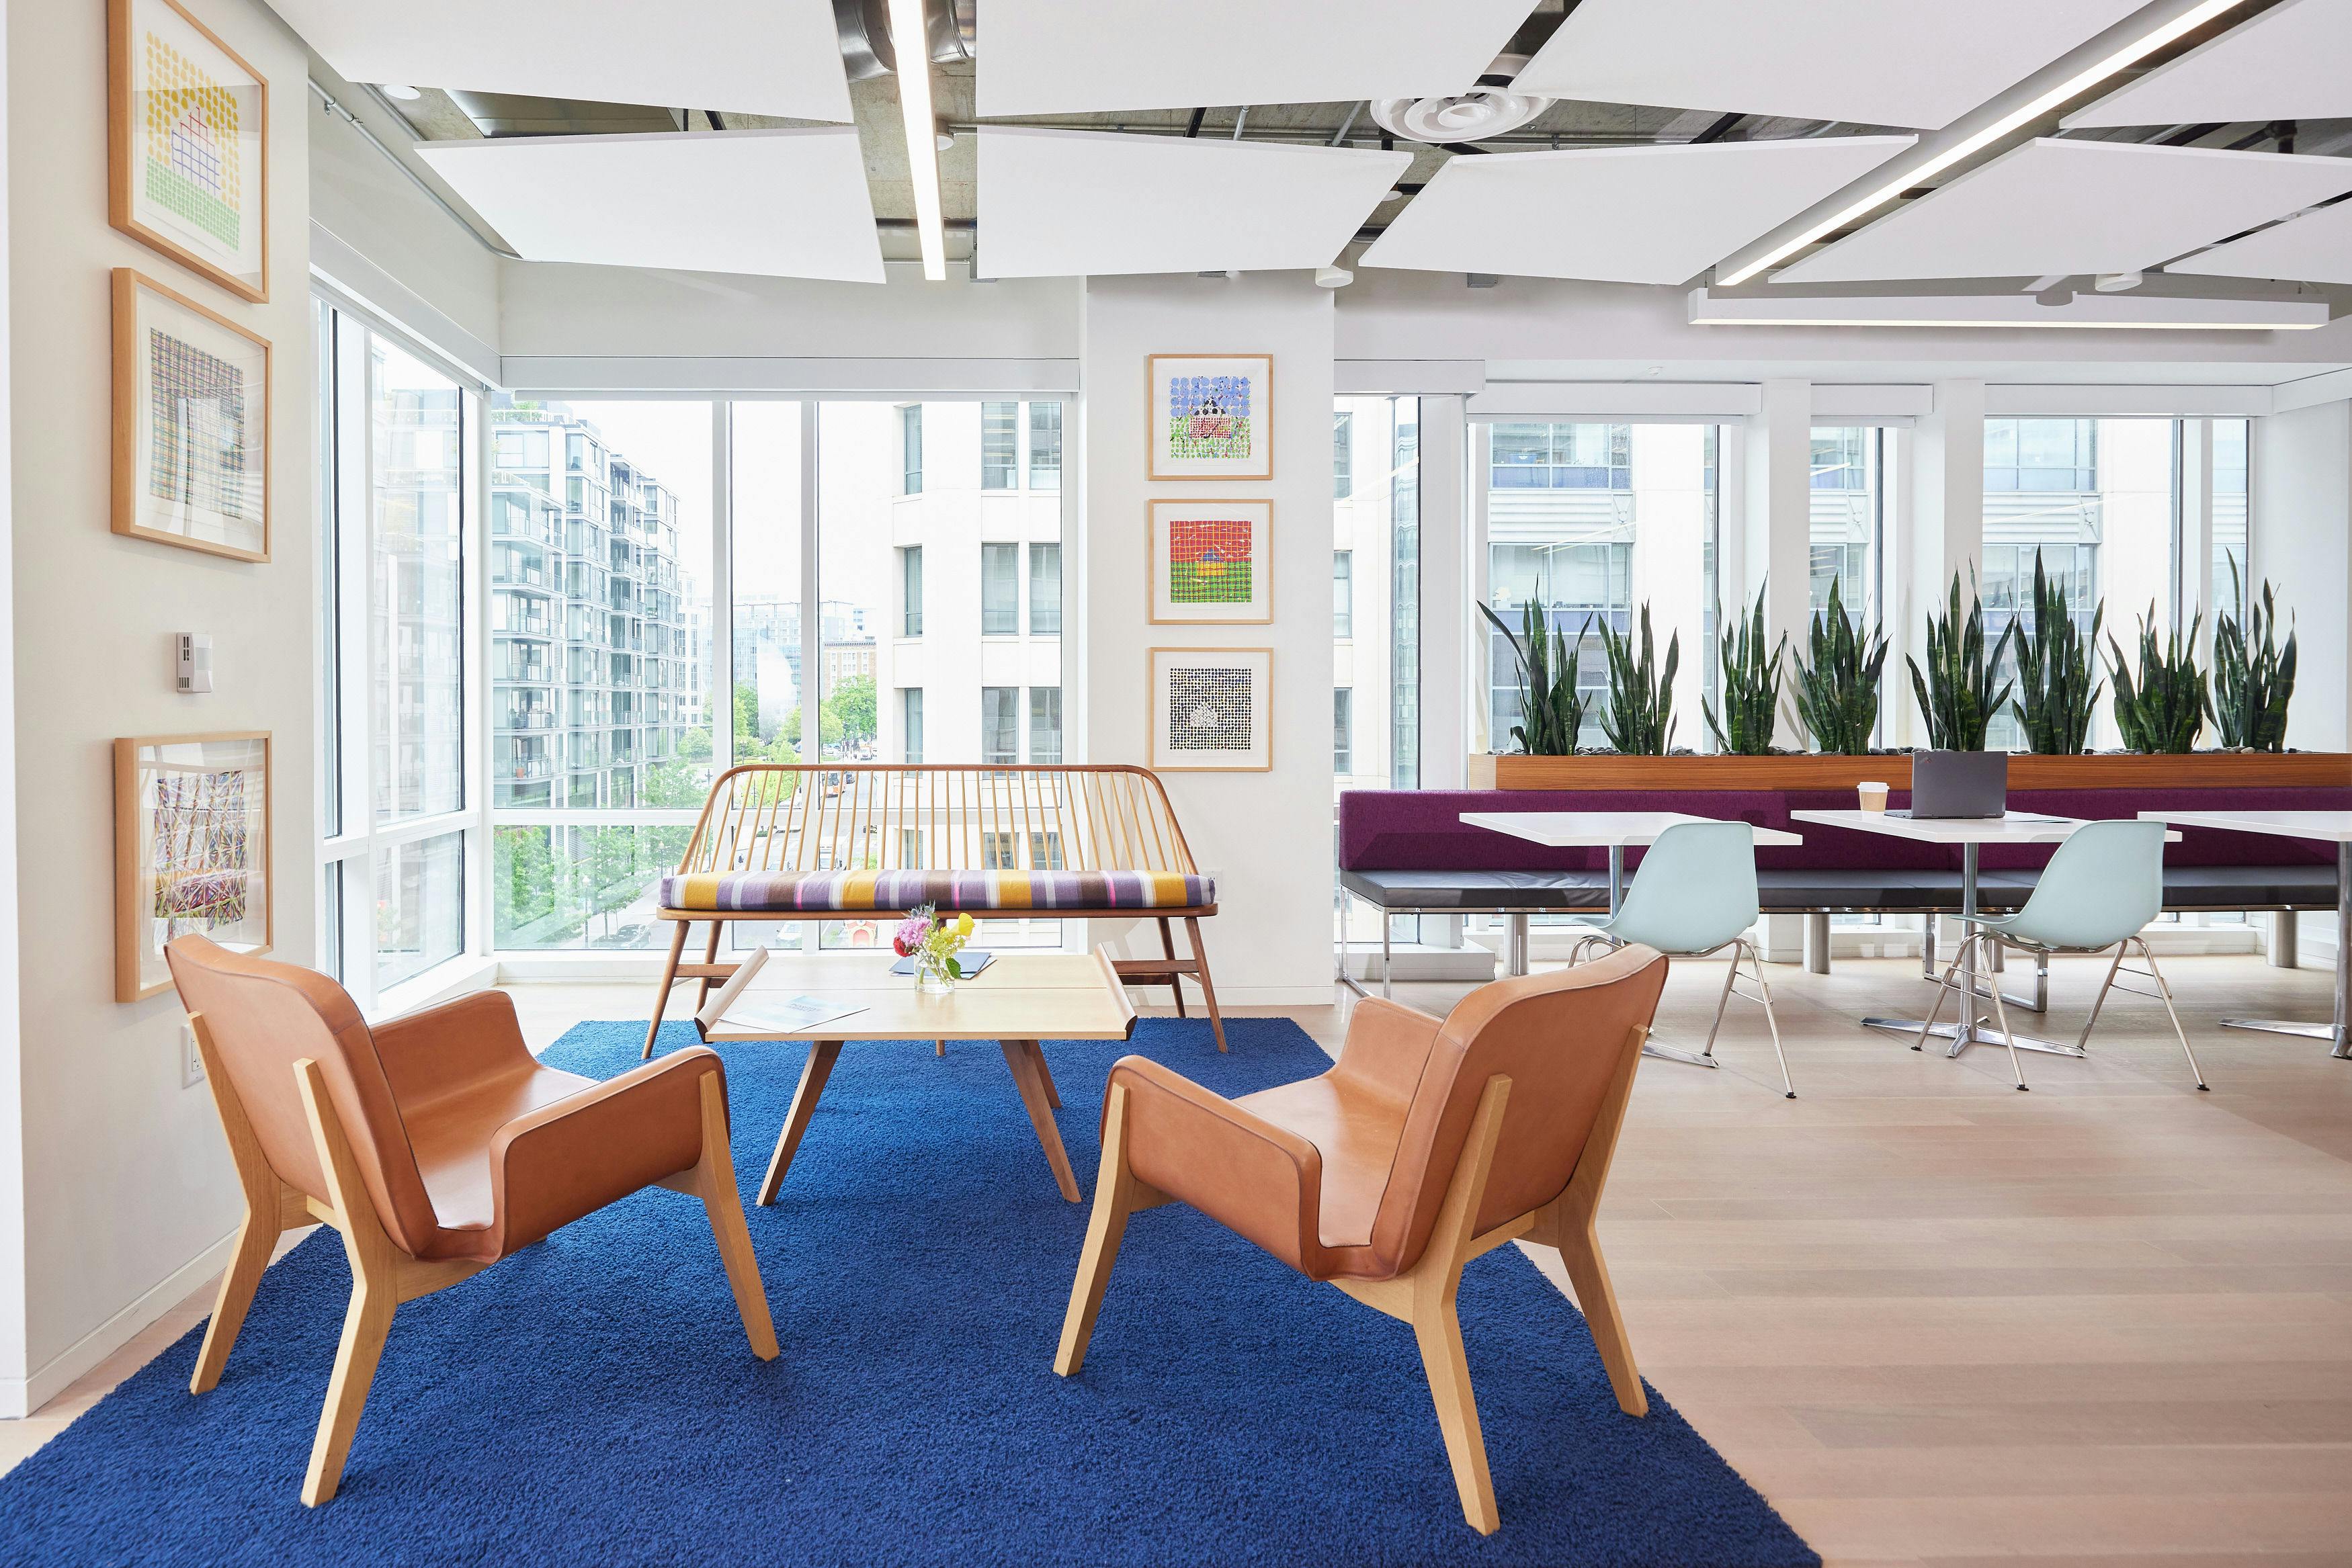 Corner of the lounge area in Nixon Peabody's DC office; on a royal blue area rug sits a table with two chairs with their backs to the viewer; facing the viewer on the other side of the table is a bench with a multi-colored cushion; additional cafe seating is visible in the back stretching to the right out of view; artwork adorns the walls and nearby buildings appear through the windows